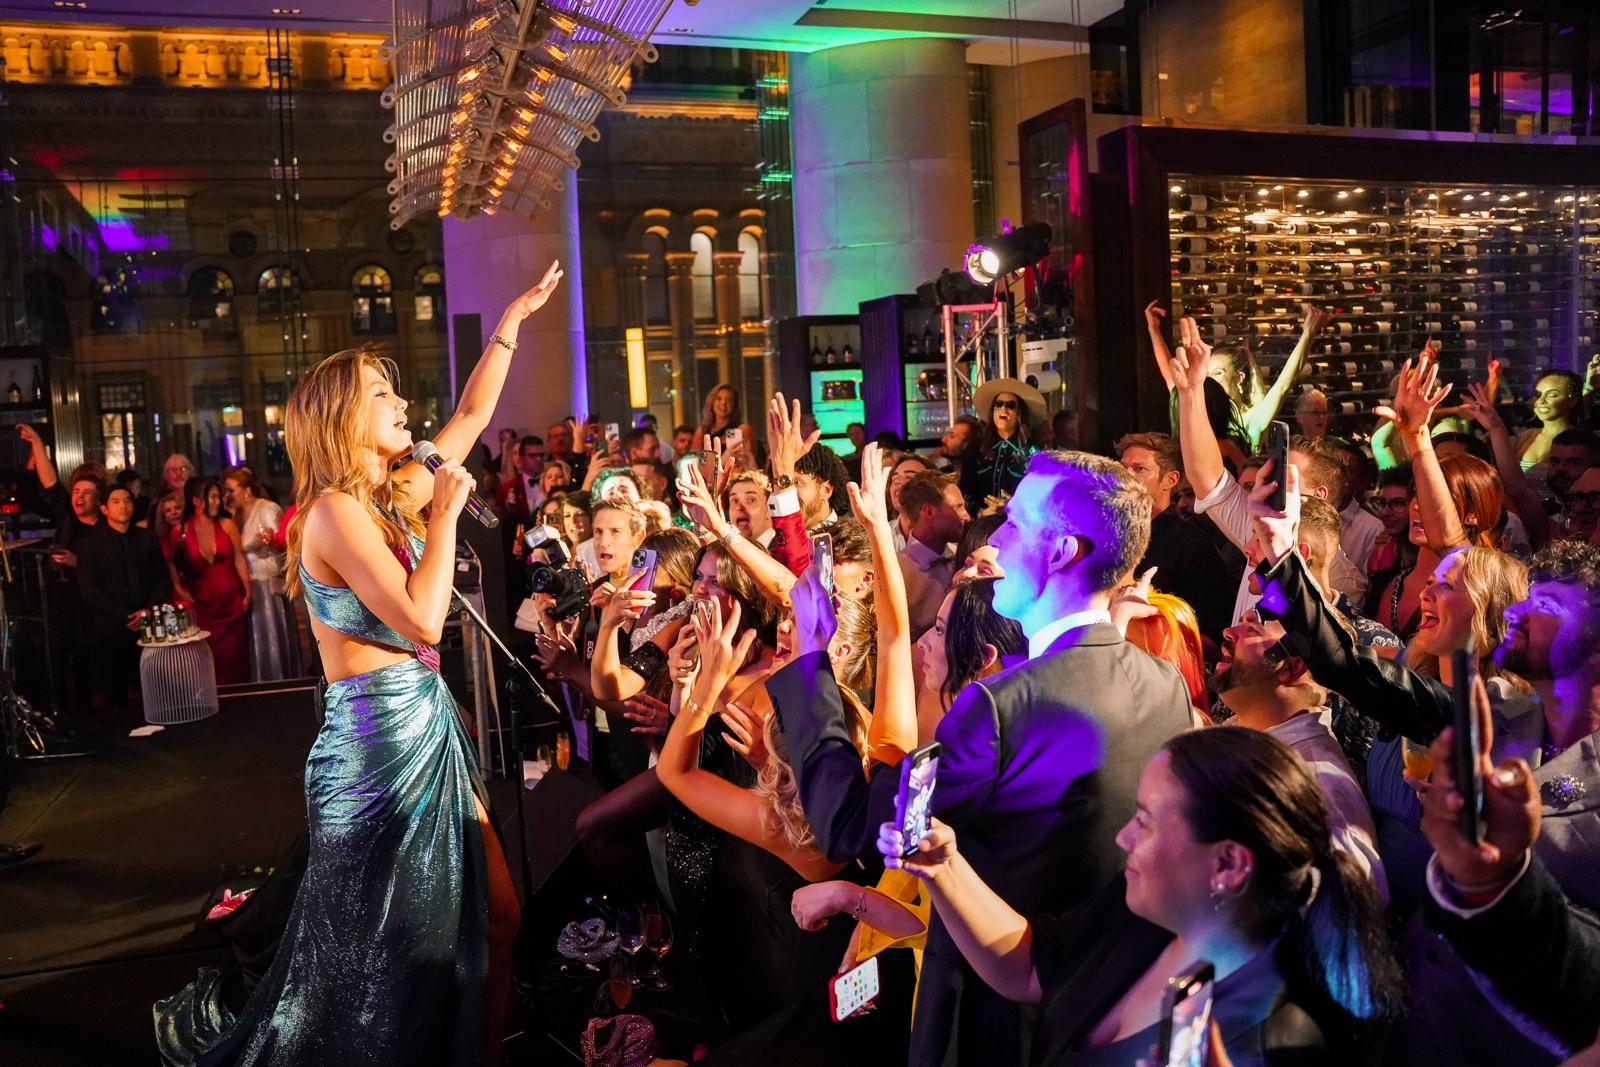 Delta Goodrem performs at Hilton and Minus18’s Rainbow Formal launch, where a star-studded crowd came together to support LGBTQIA+ young people’s right to inclusive spaces across Australia